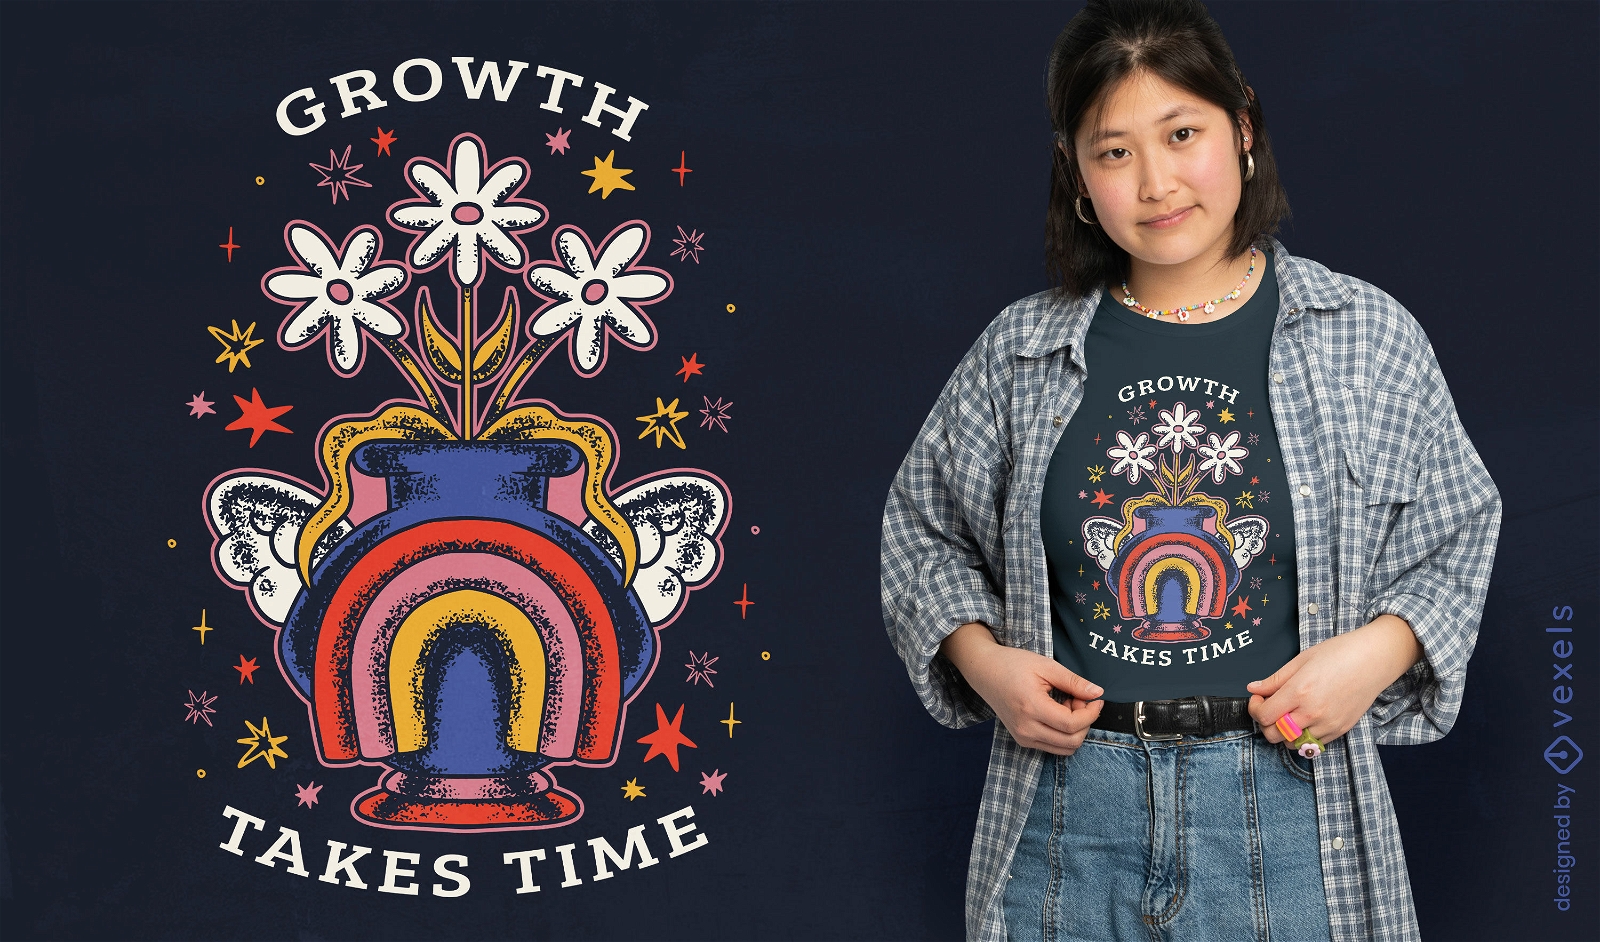 Growth takes time floral t-shirt design